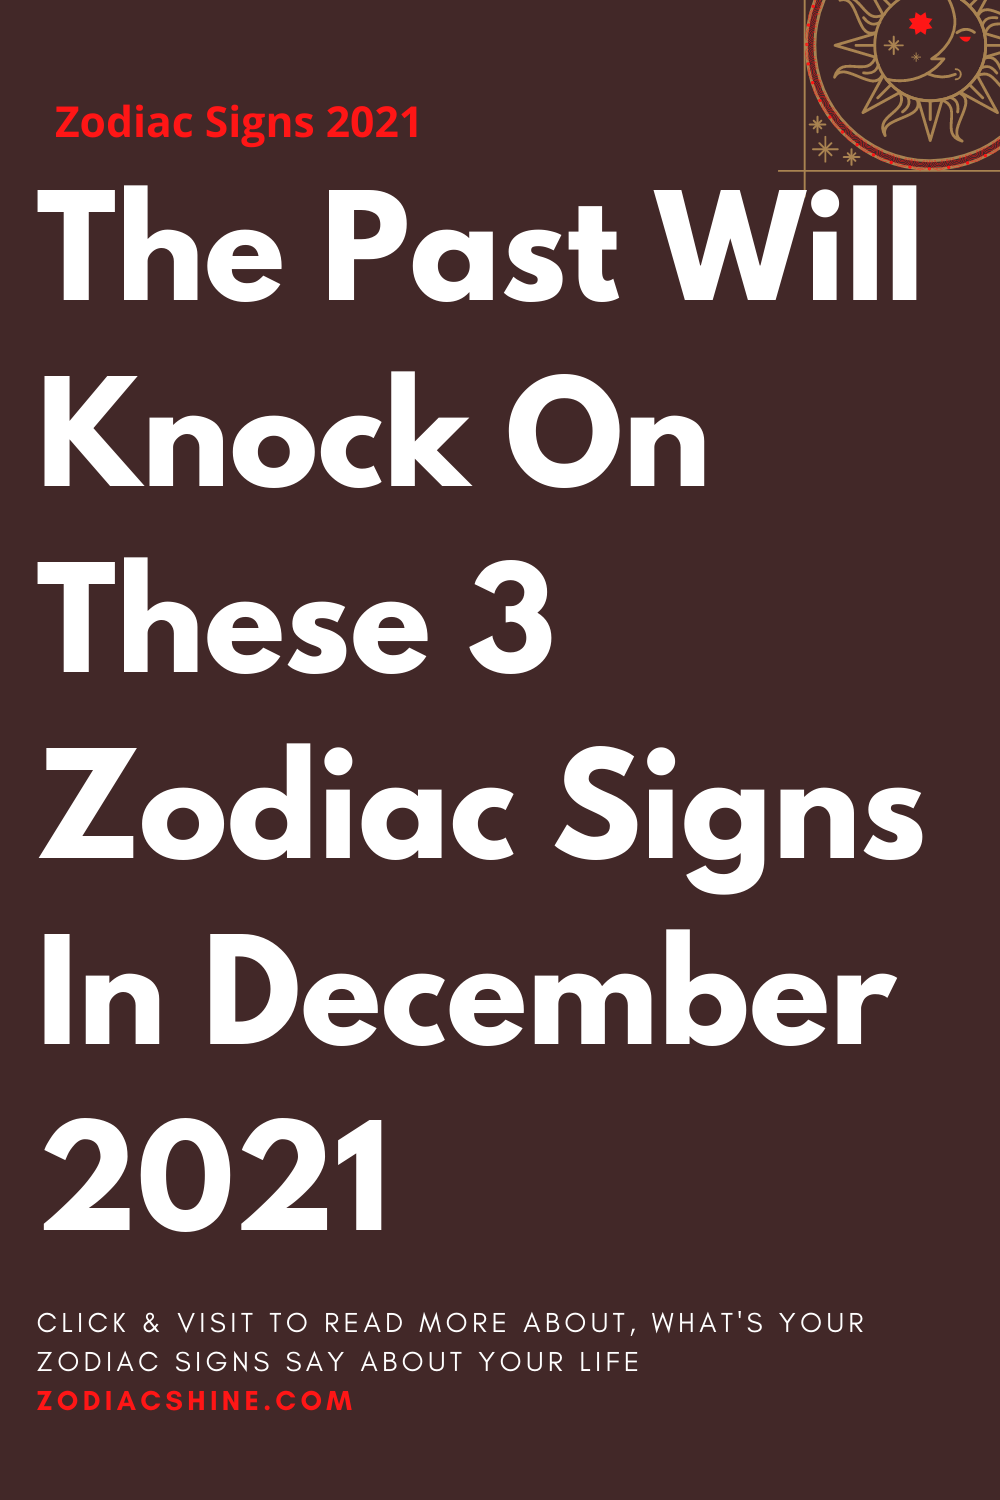 The Past Will Knock On These 3 Zodiac Signs In December 2021